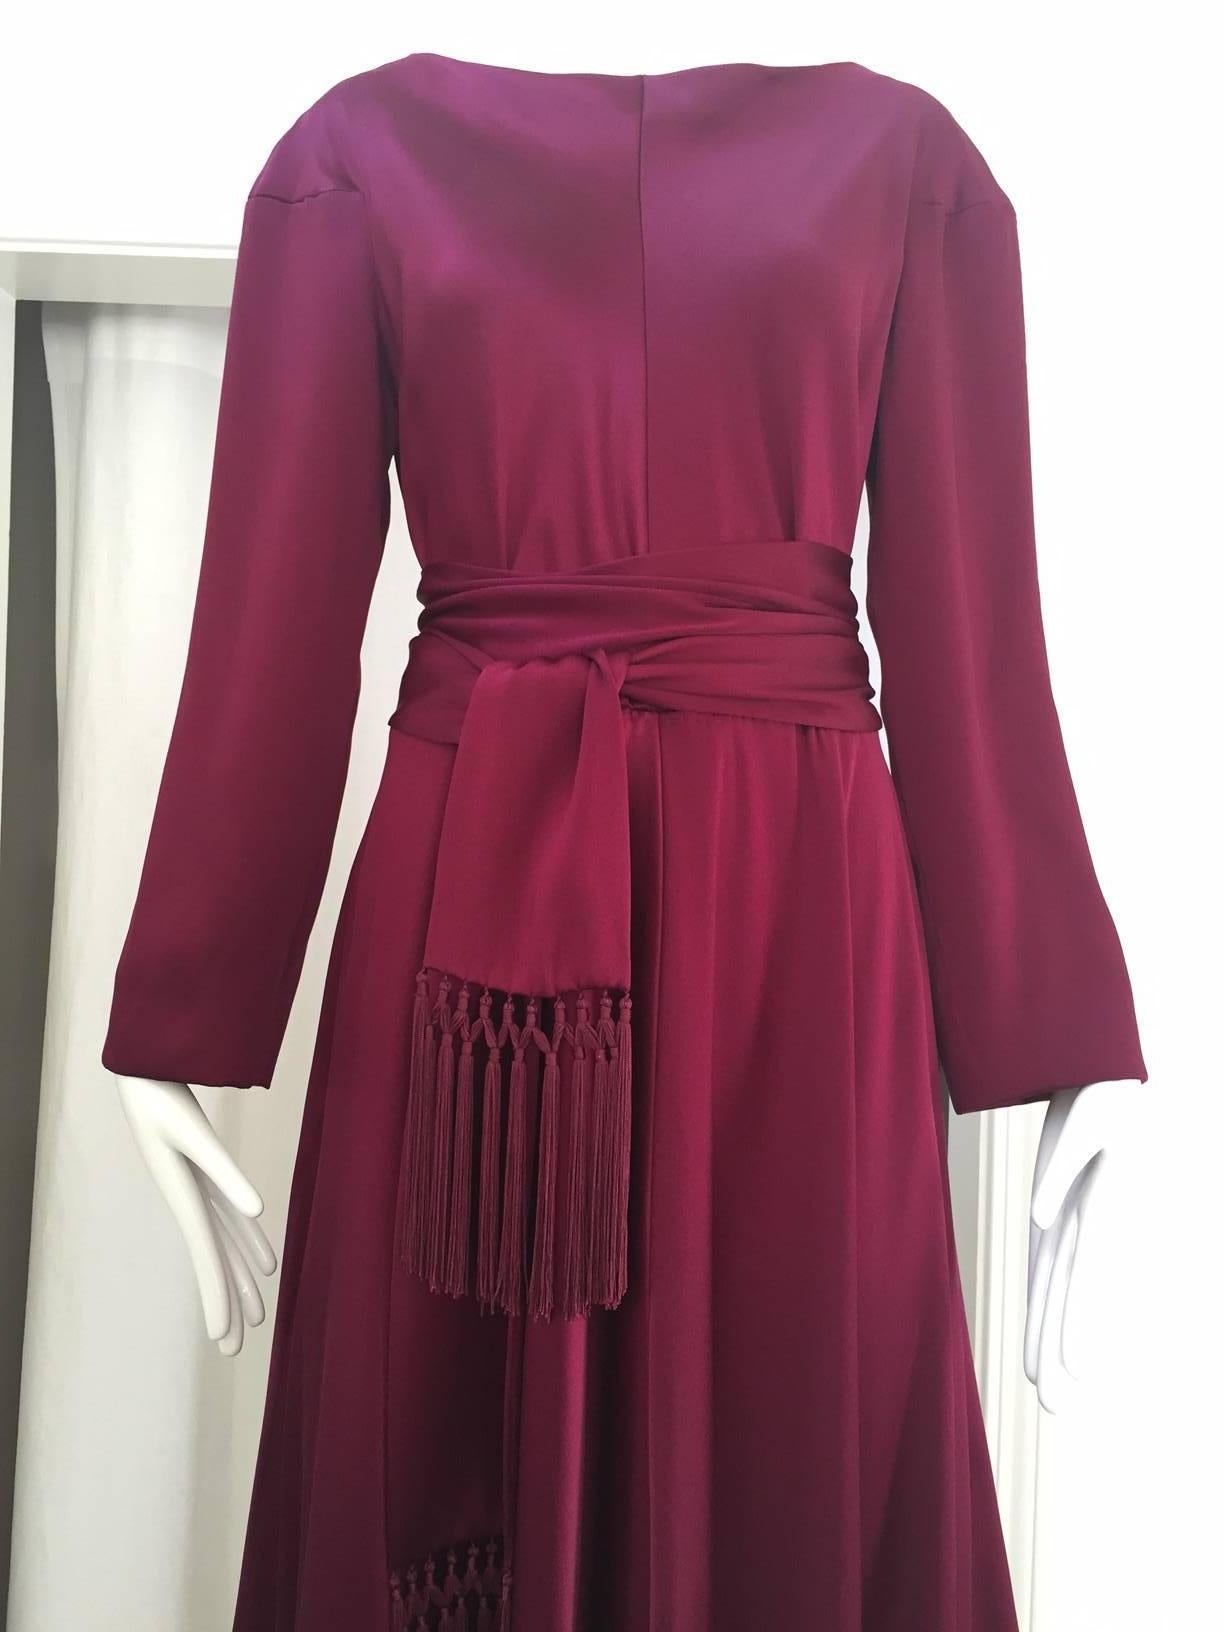 Beautiful 1970s Jean Patou Silk Charmeuse in Red Plum with long sash.
Bust: 38